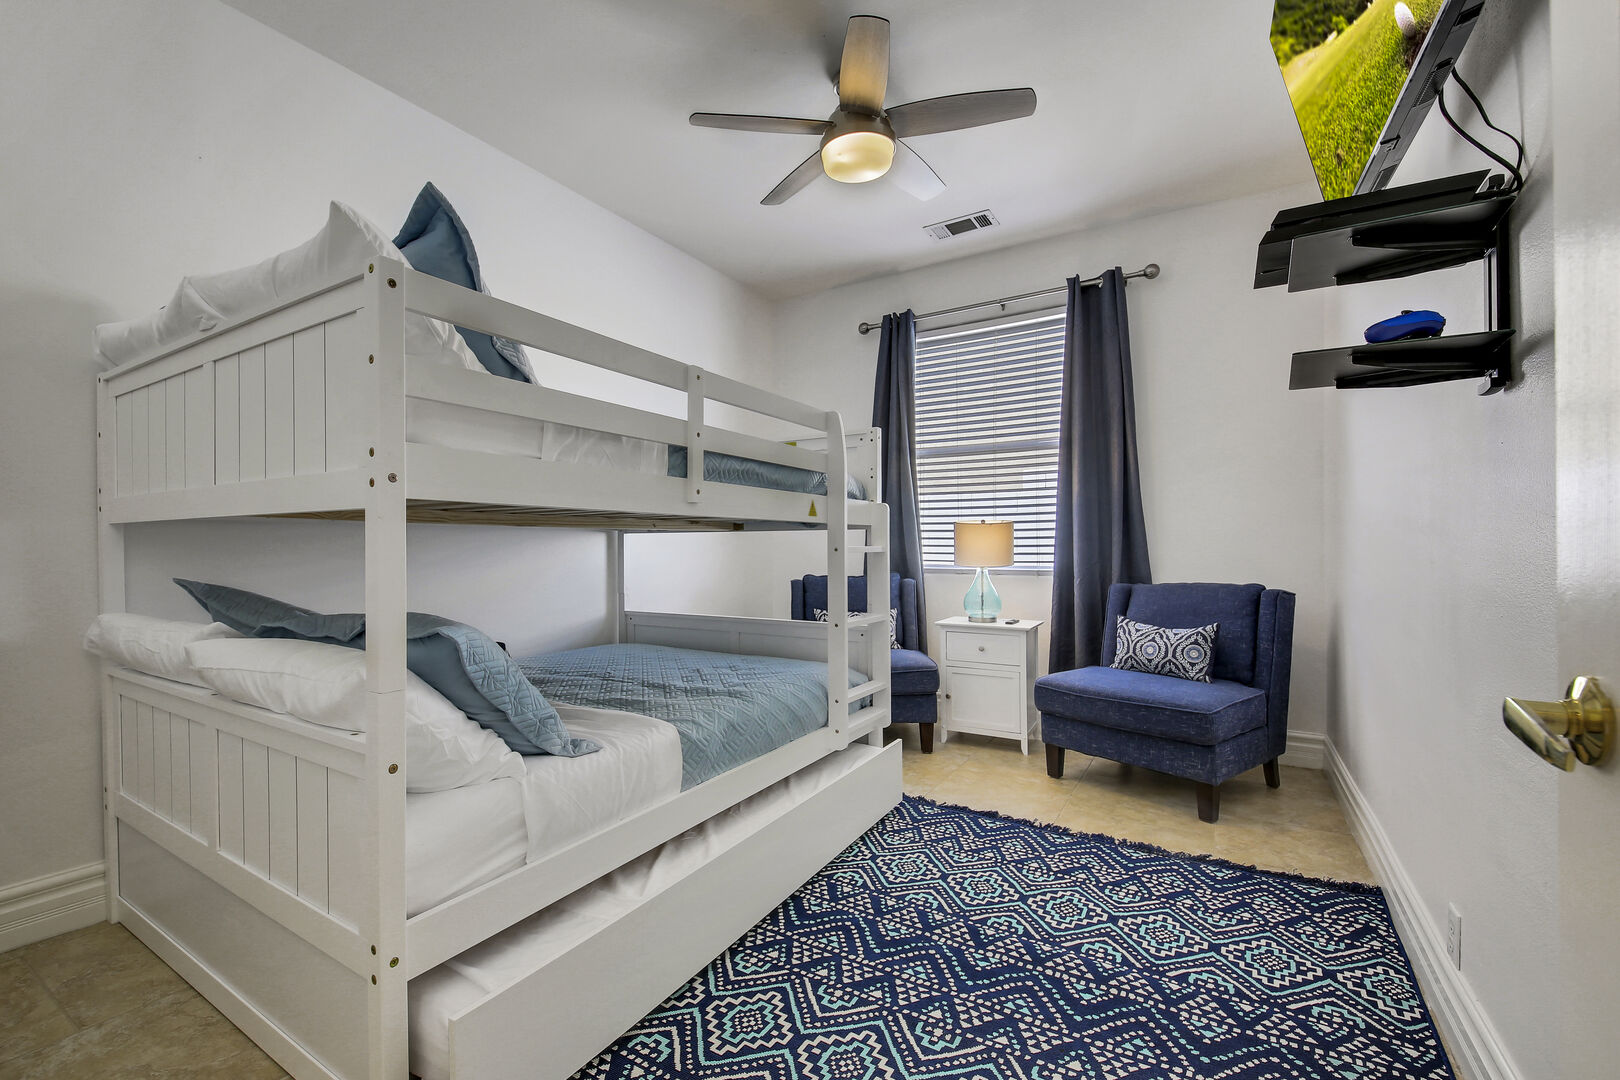 Bedroom 2 is located next to Master Suite 1 and features a Full Over Full with Twin Trundle Bunk Bed, 43-inch Samsung 4K Smart television, remote-controlled ceiling fan, and reach-in closet.